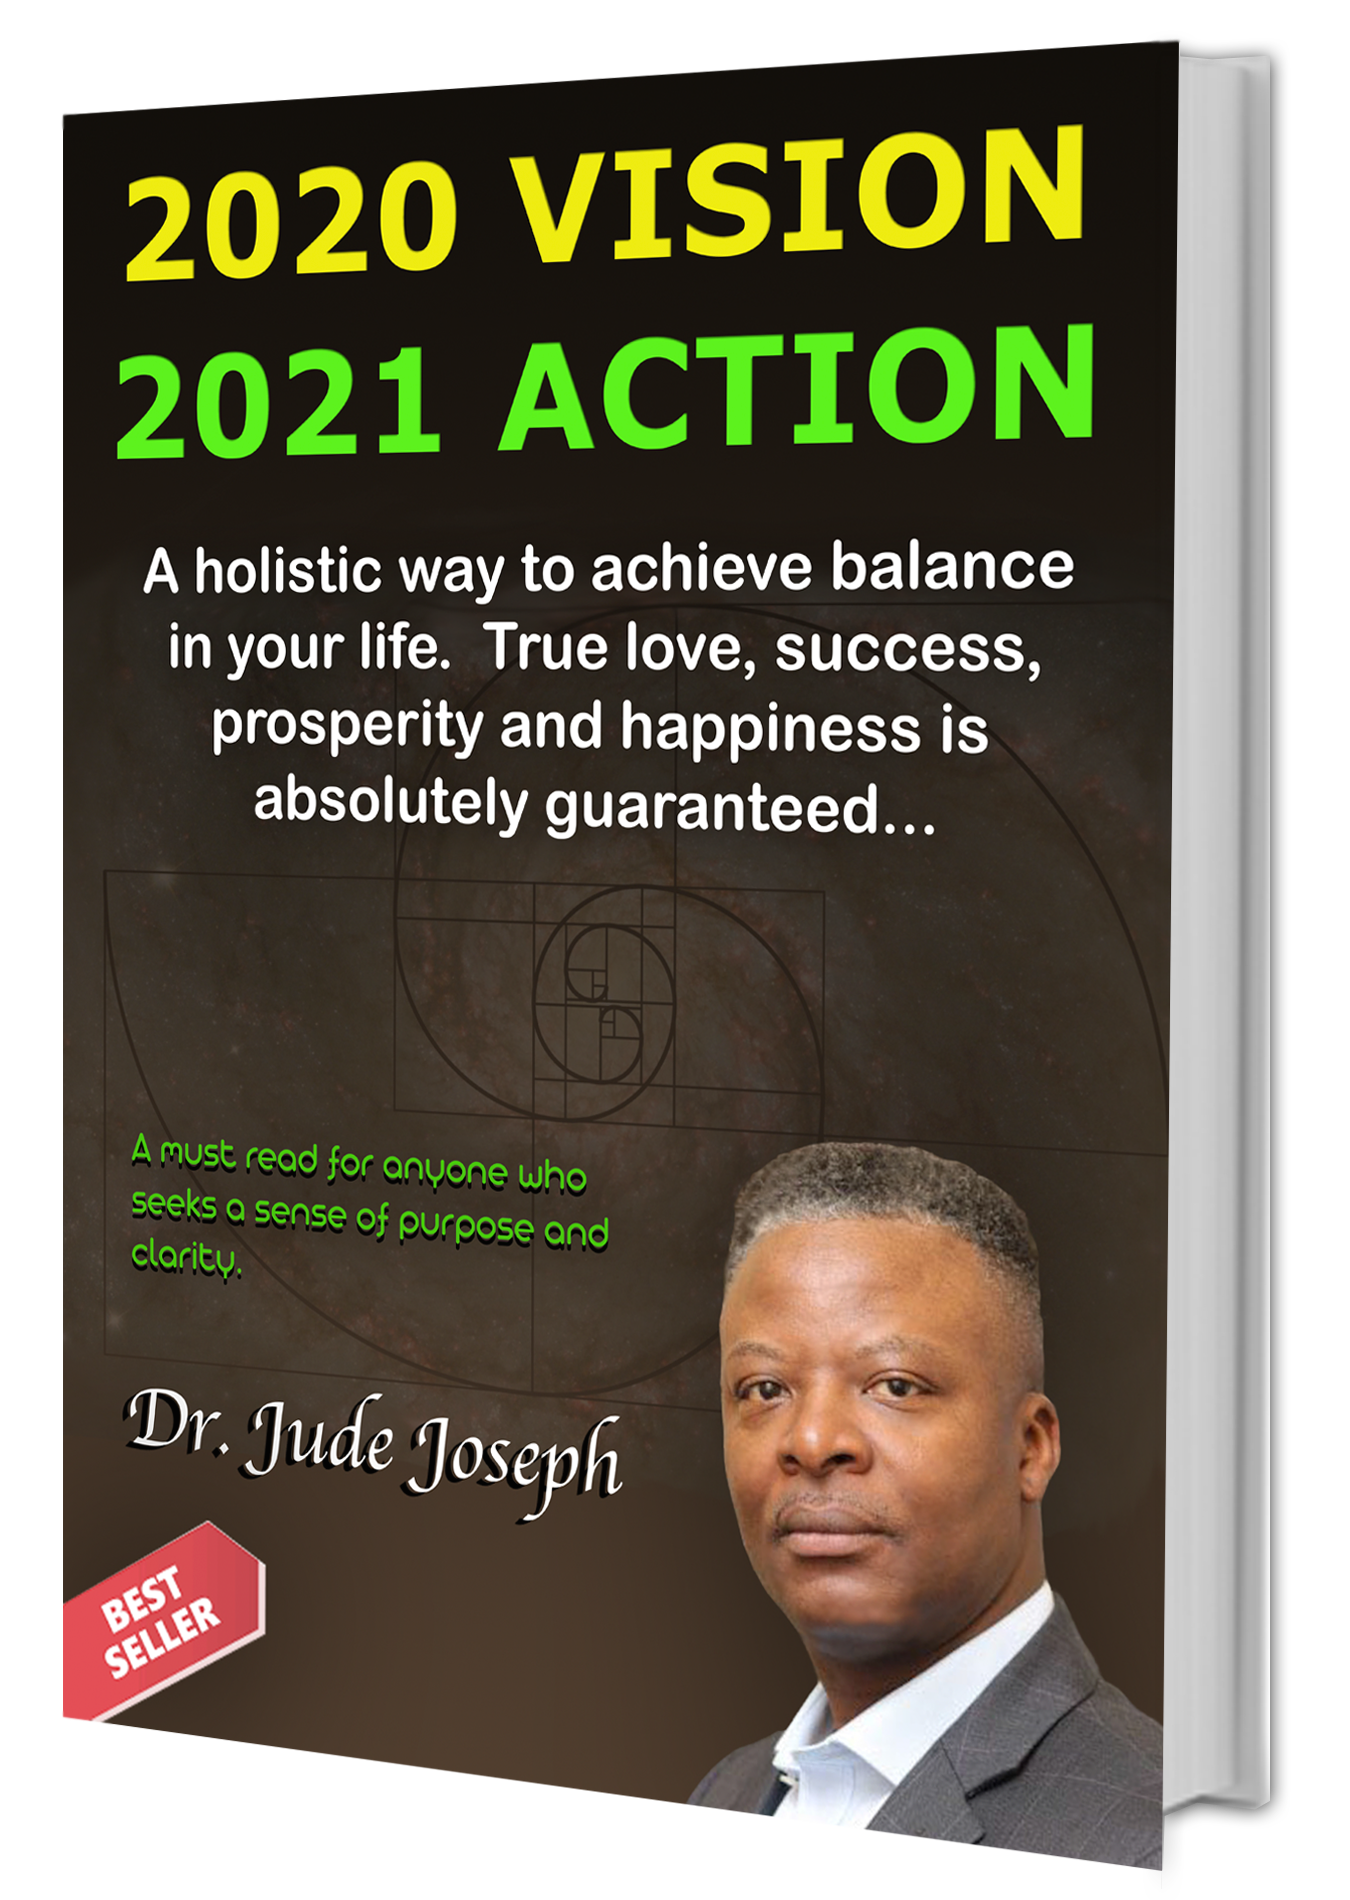 Image of 2020 vision 2021 action book